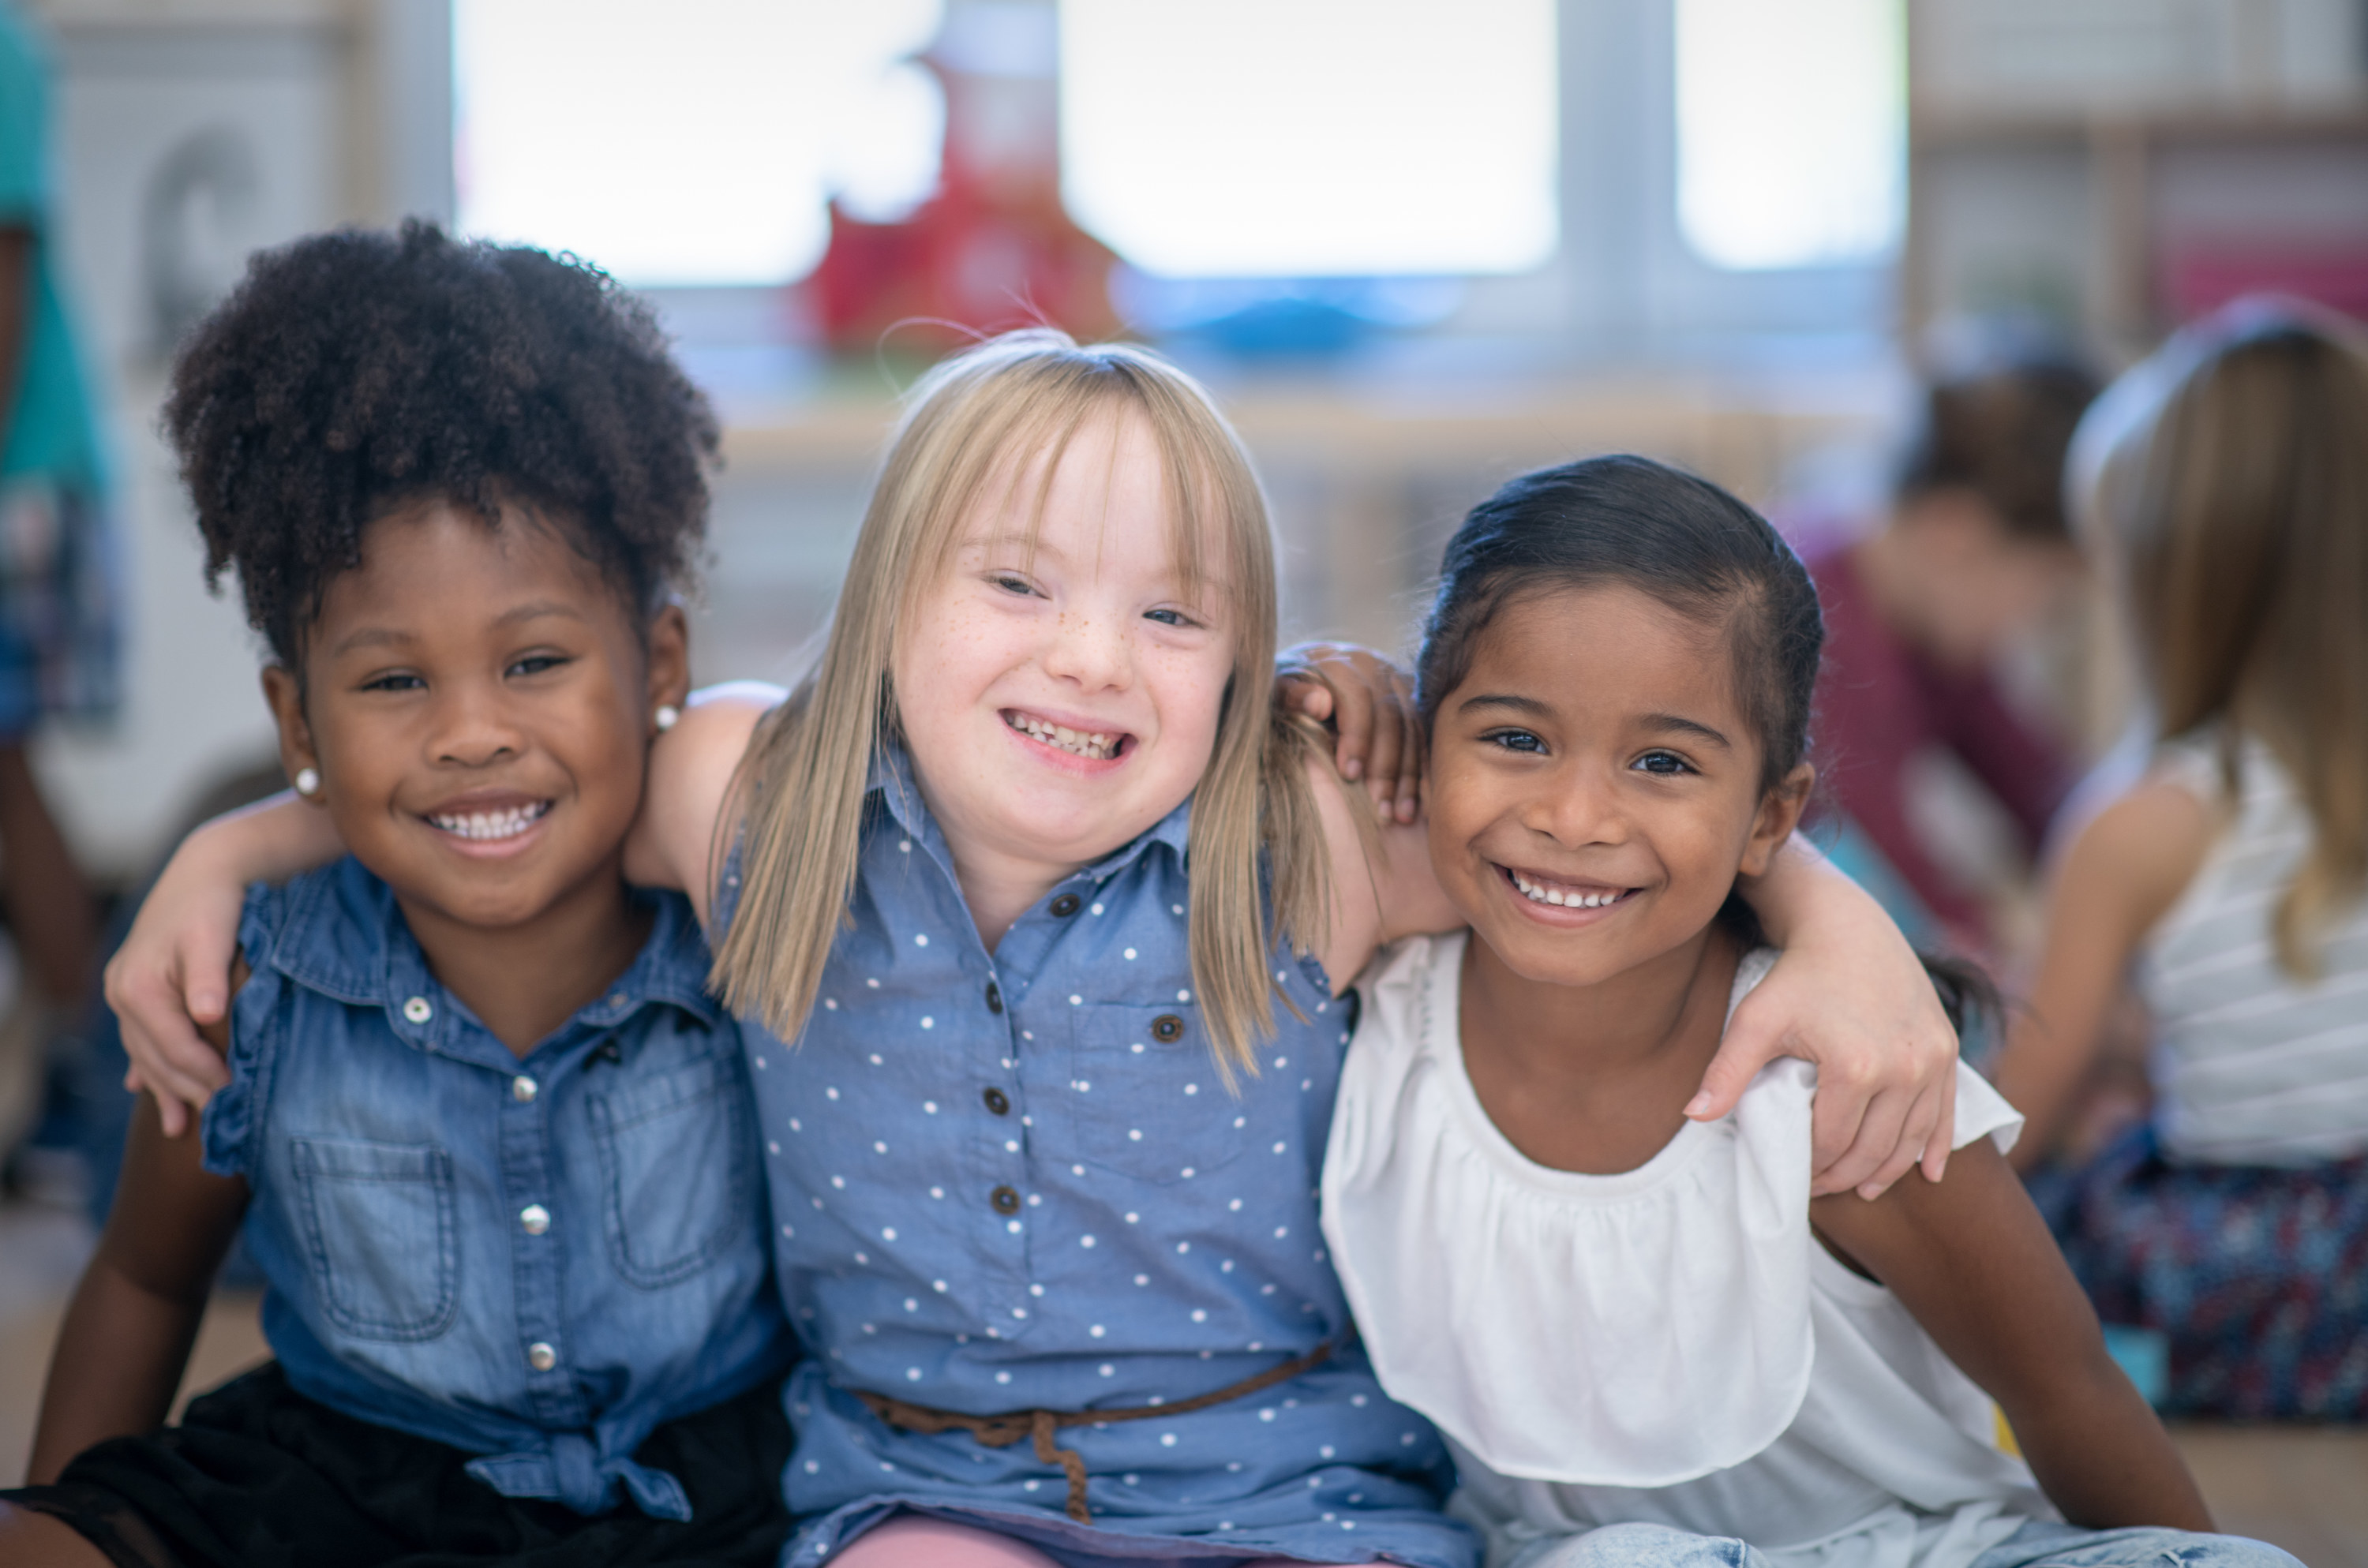 Three multi-ethnic preschool girls smiling in their classroom, and one of the girls (in the middle) has Down syndrome